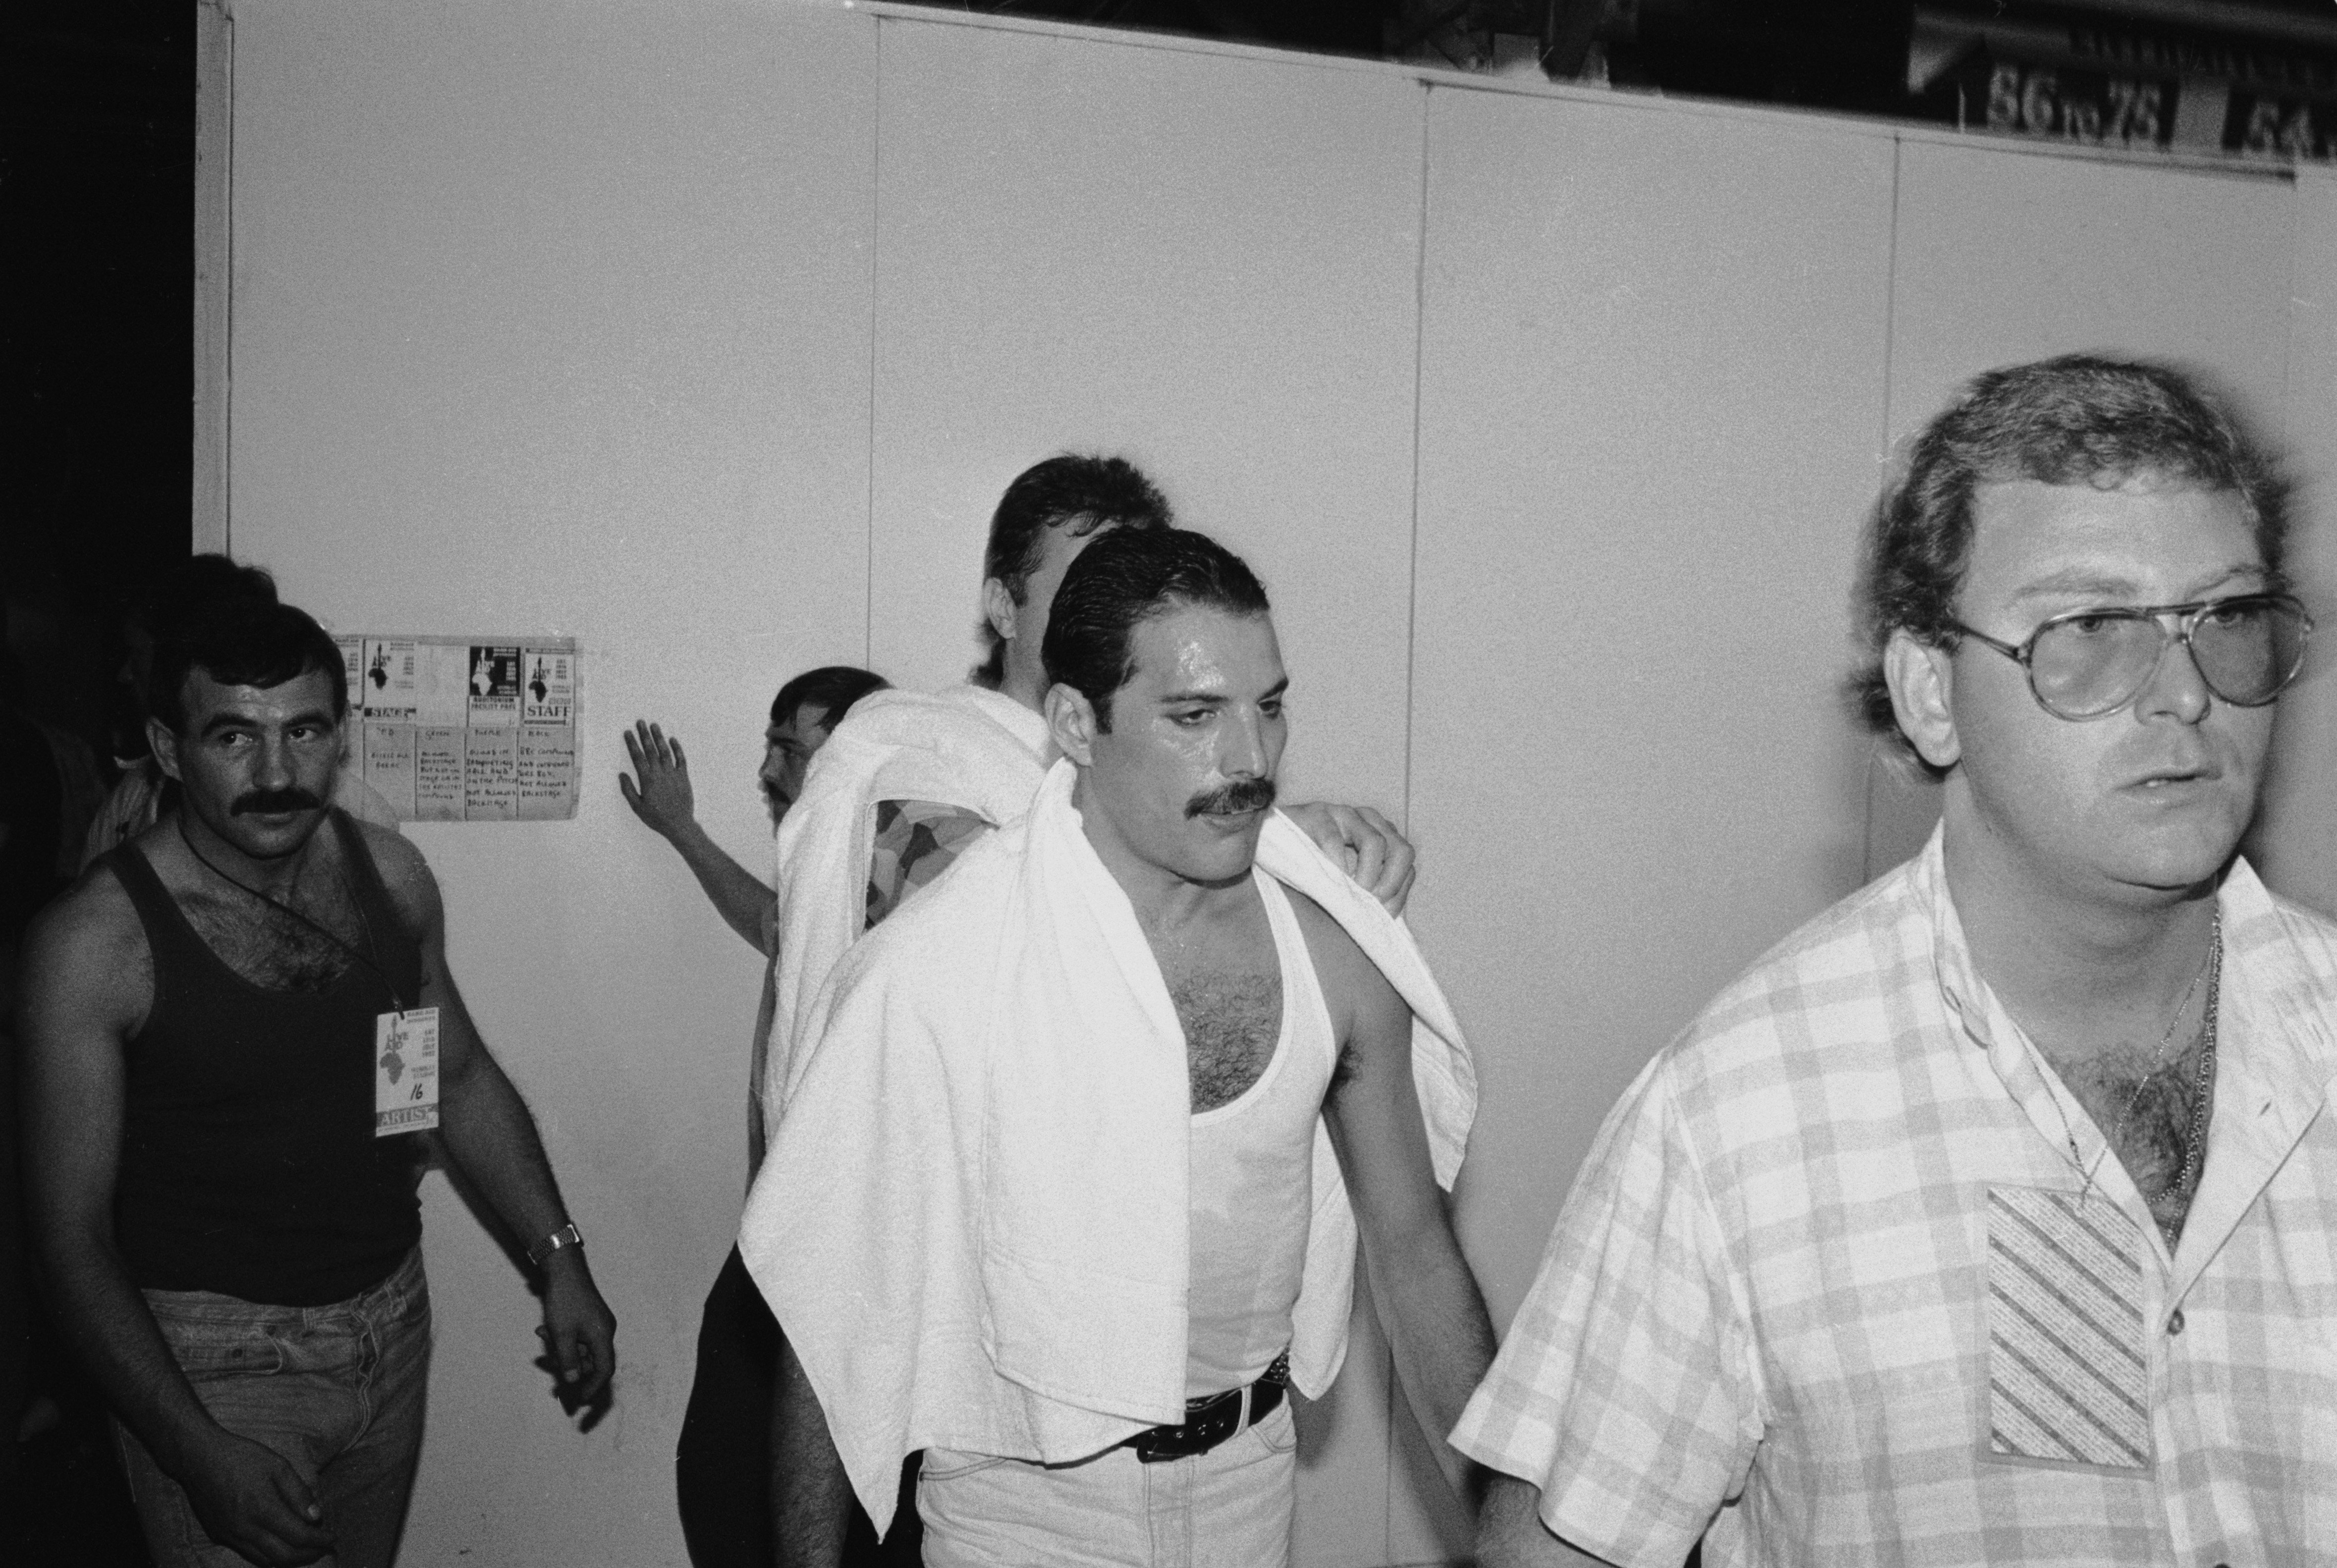 Freddie Mercury and his boyfriend, on the left, Jim Hutton, at the Live Aid concert at Wembley on July 13, 1985. | Source: Getty Images